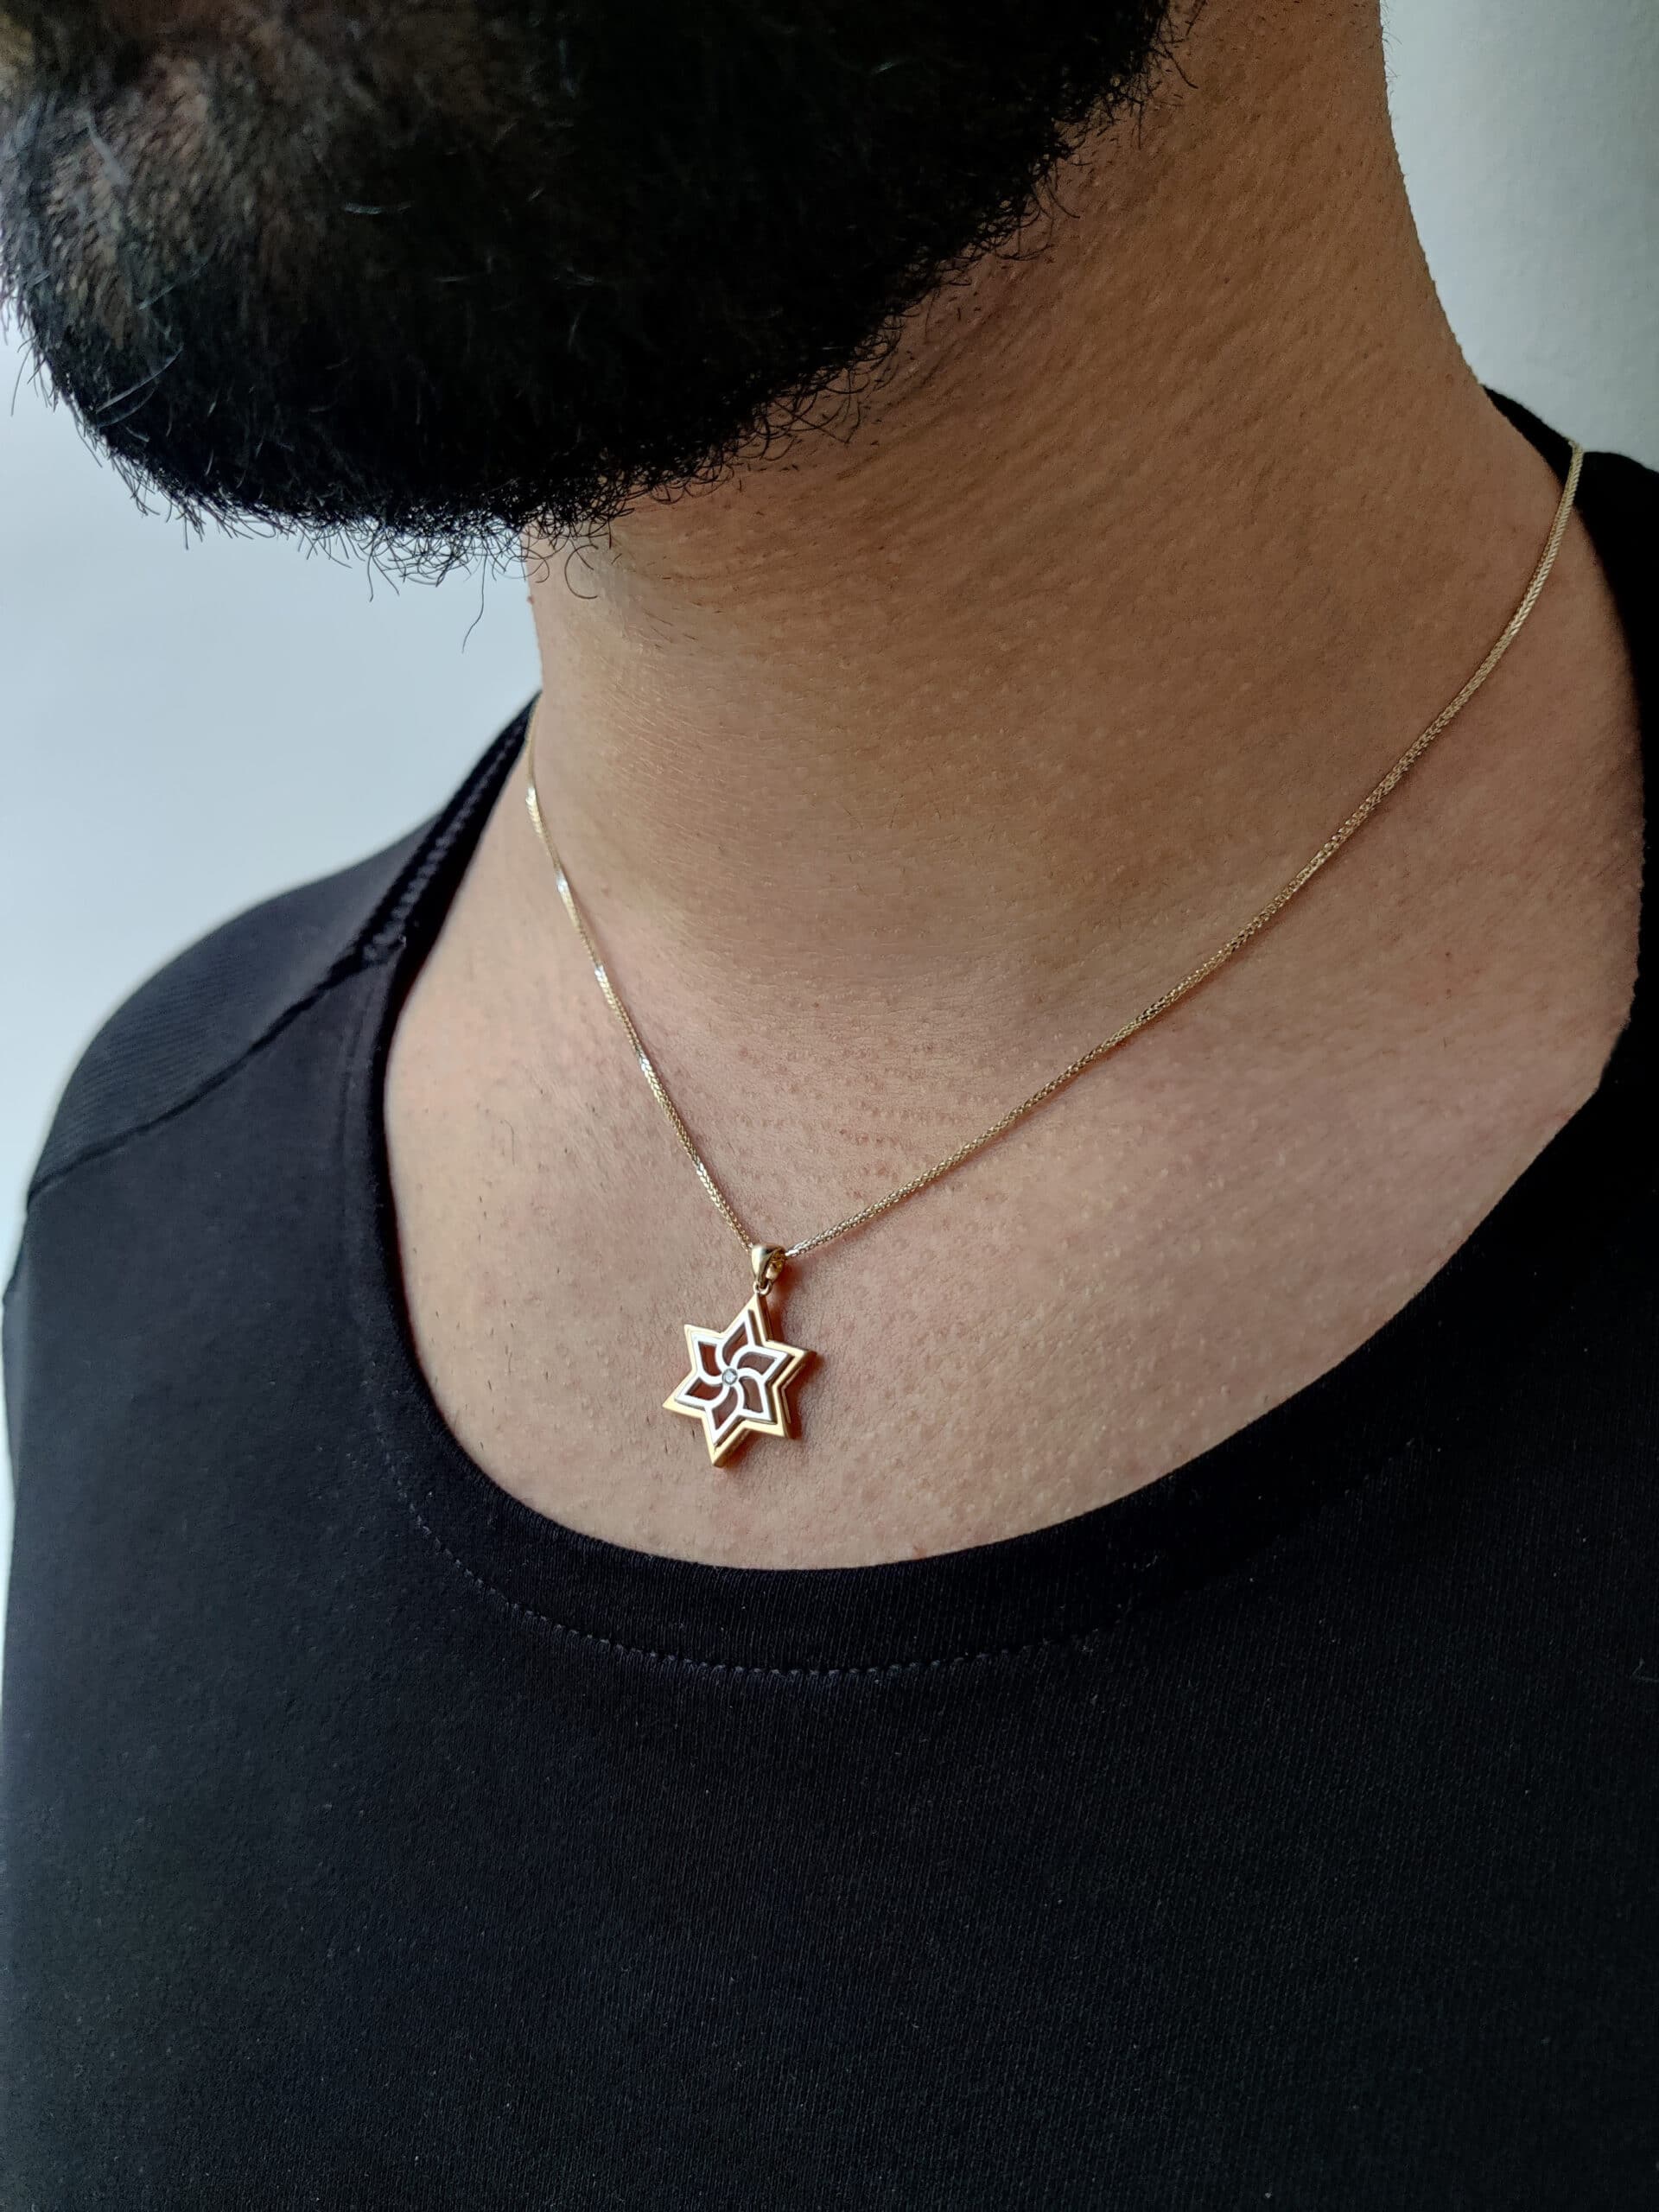 White and Yelllow Gold Star of David Diamond Pendant Necklace